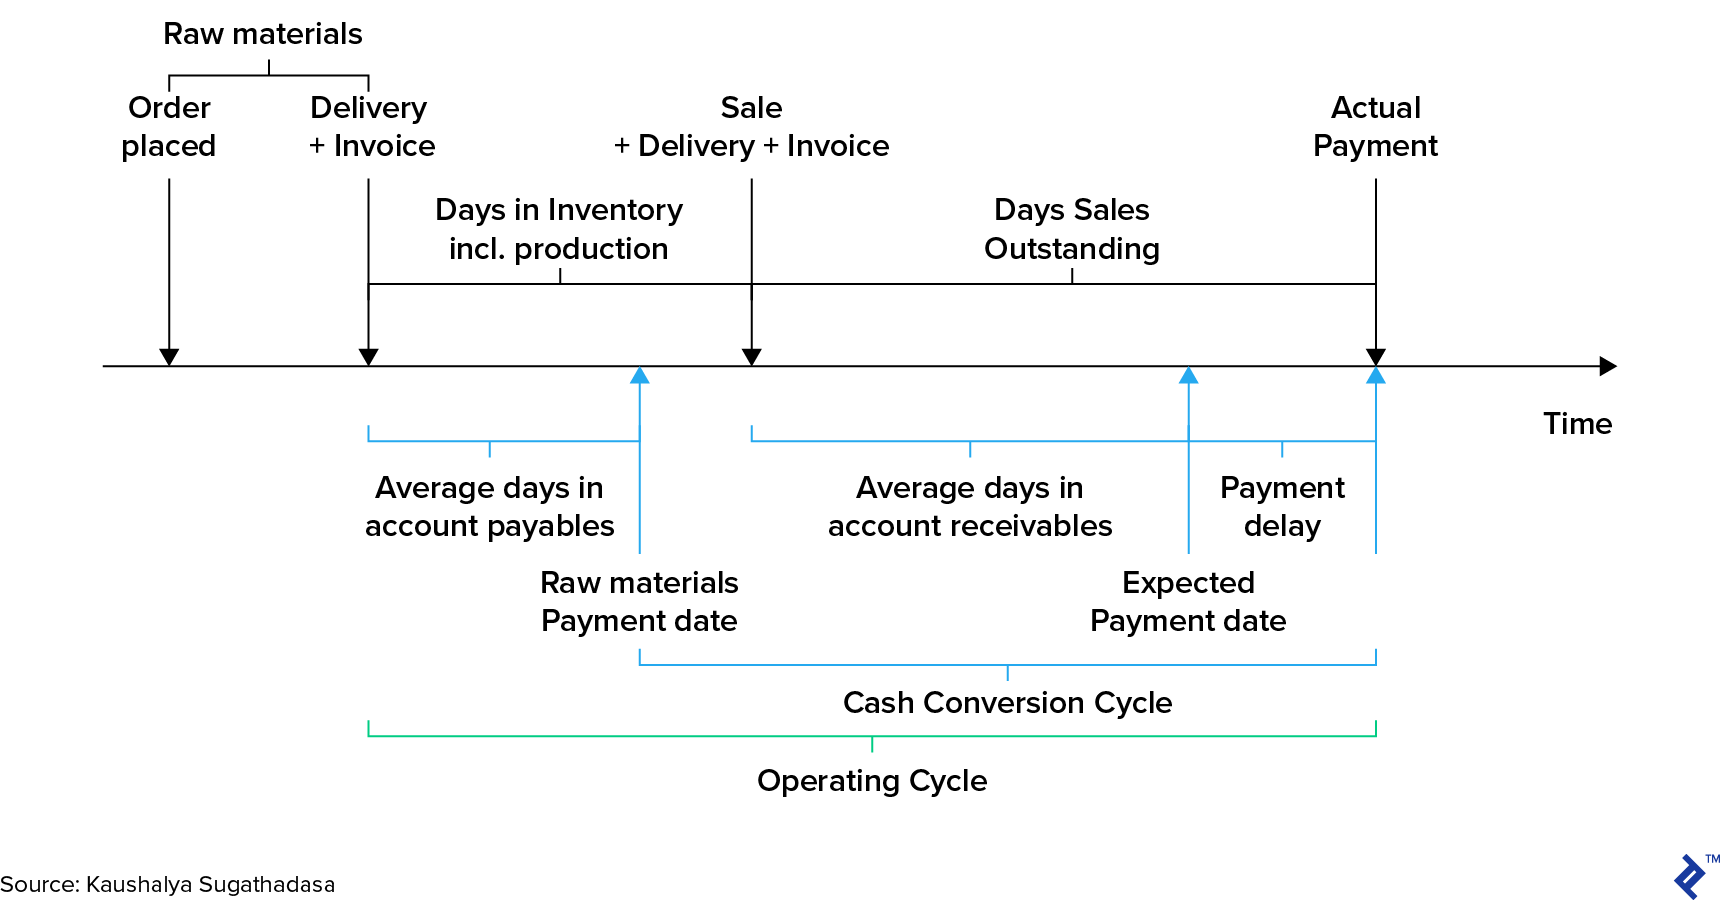 Cash Conversion Cycle Within the Operating Cycle of a Business